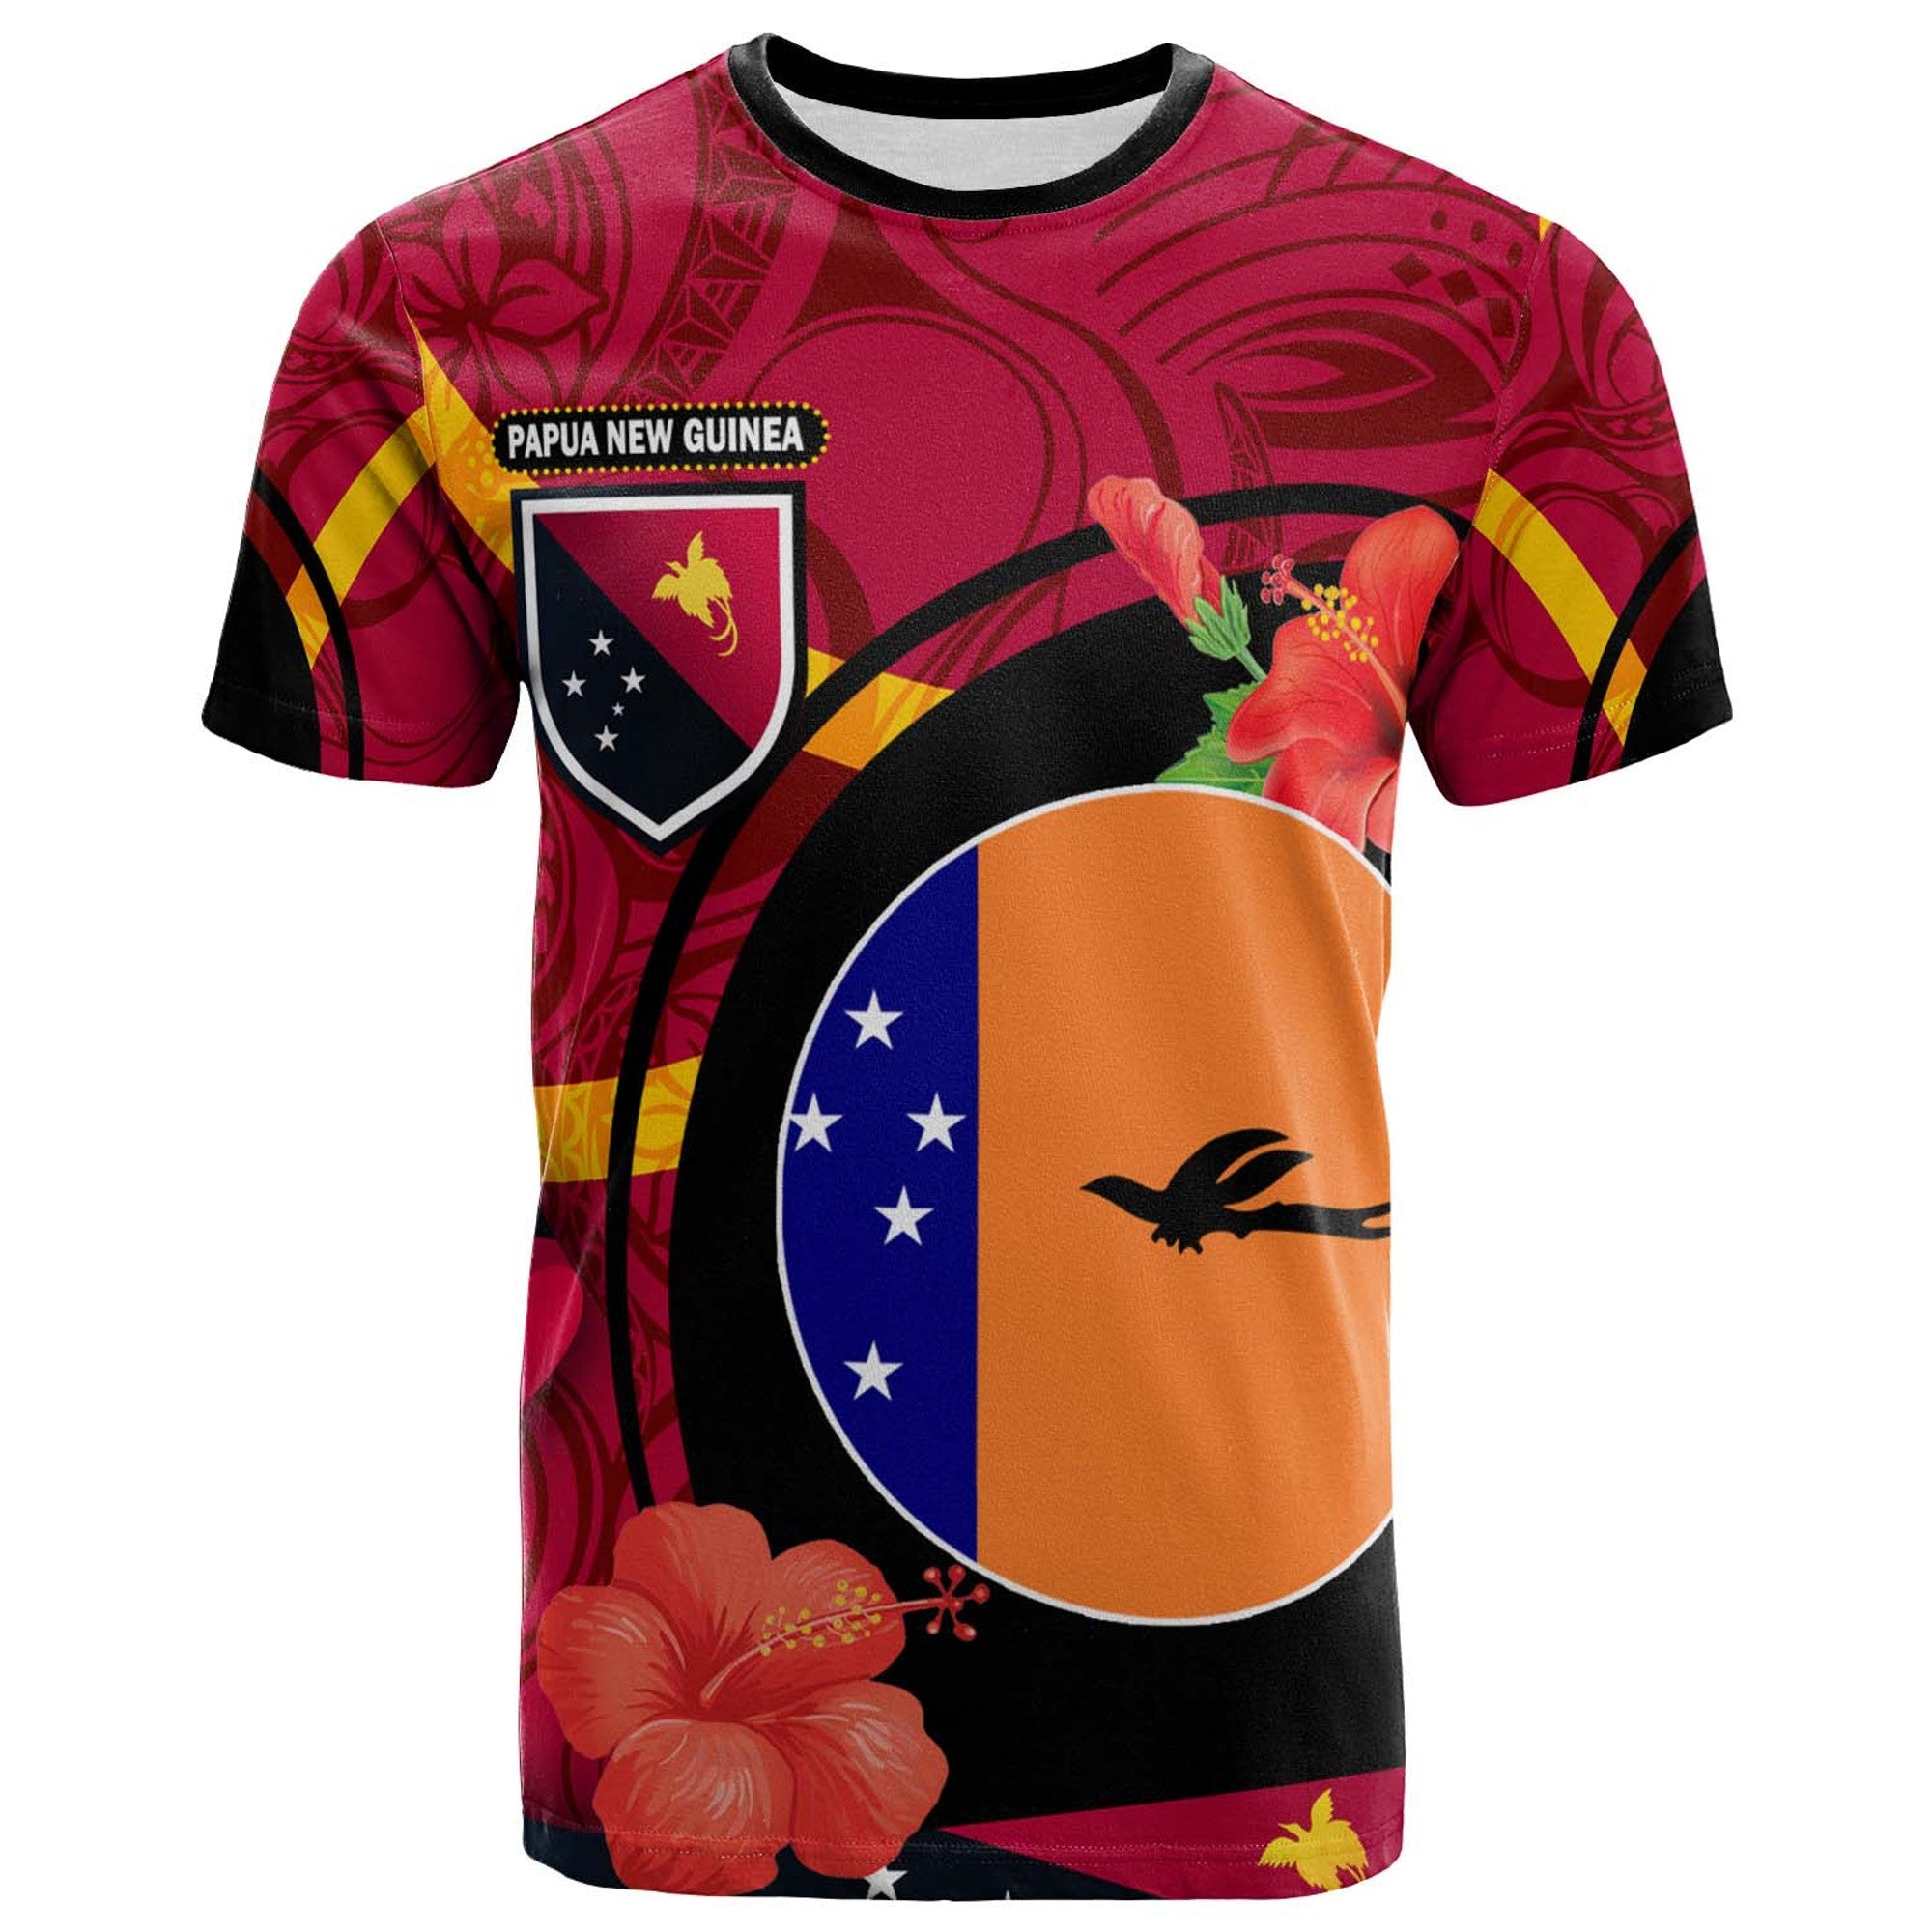 papua-new-guinea-t-shirt-new-ireland-flag-of-png-with-hibicus-and-polynesian-culture-t-shirt